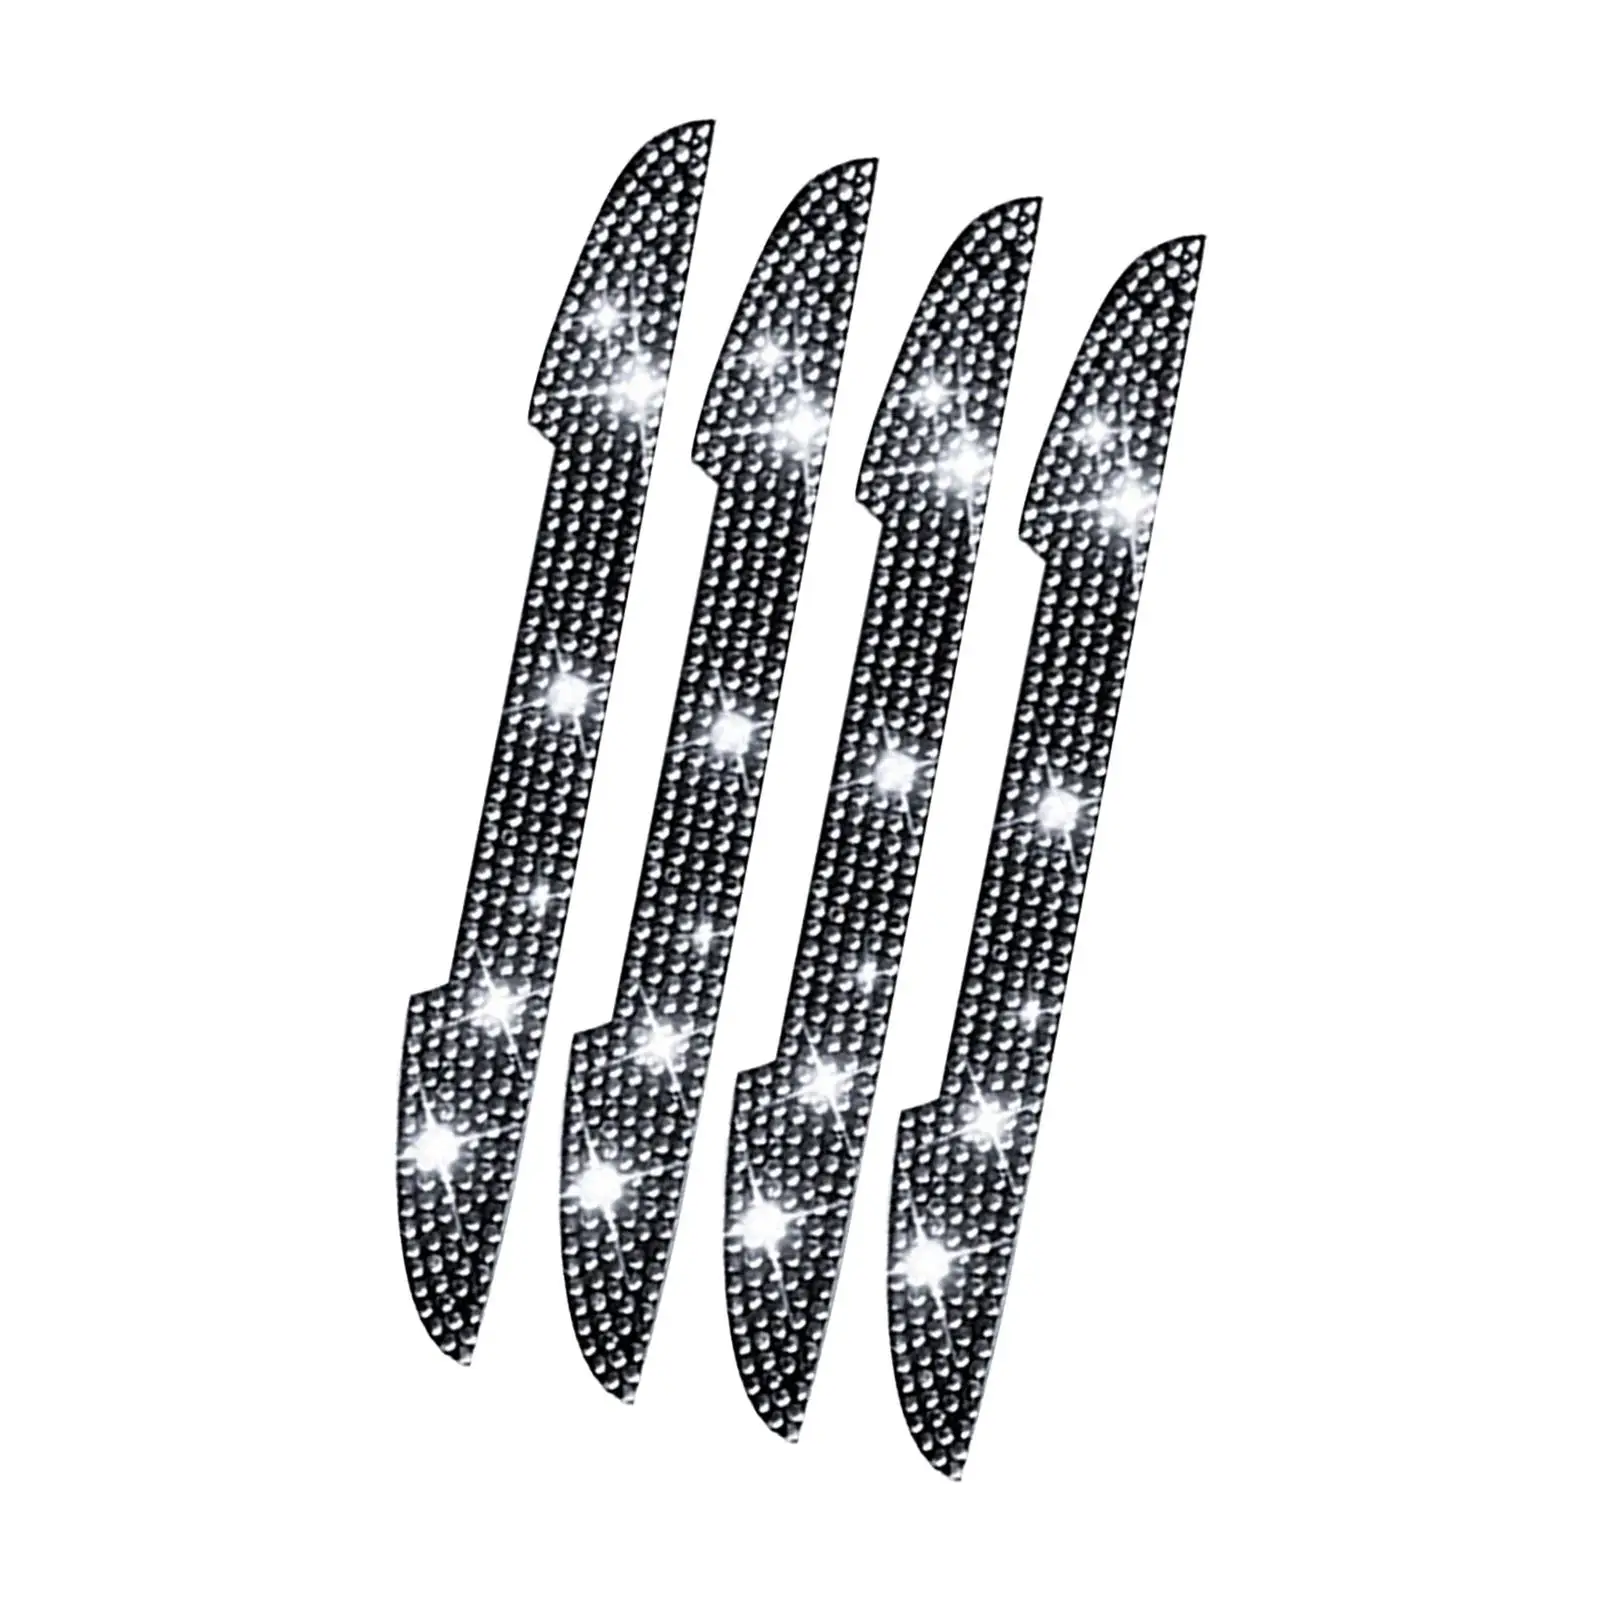 4Pcs Rhinestones Car Door Side Edge Protection Guards Self Adhesive Anti Collision Strips for Rear View Mirror Cover